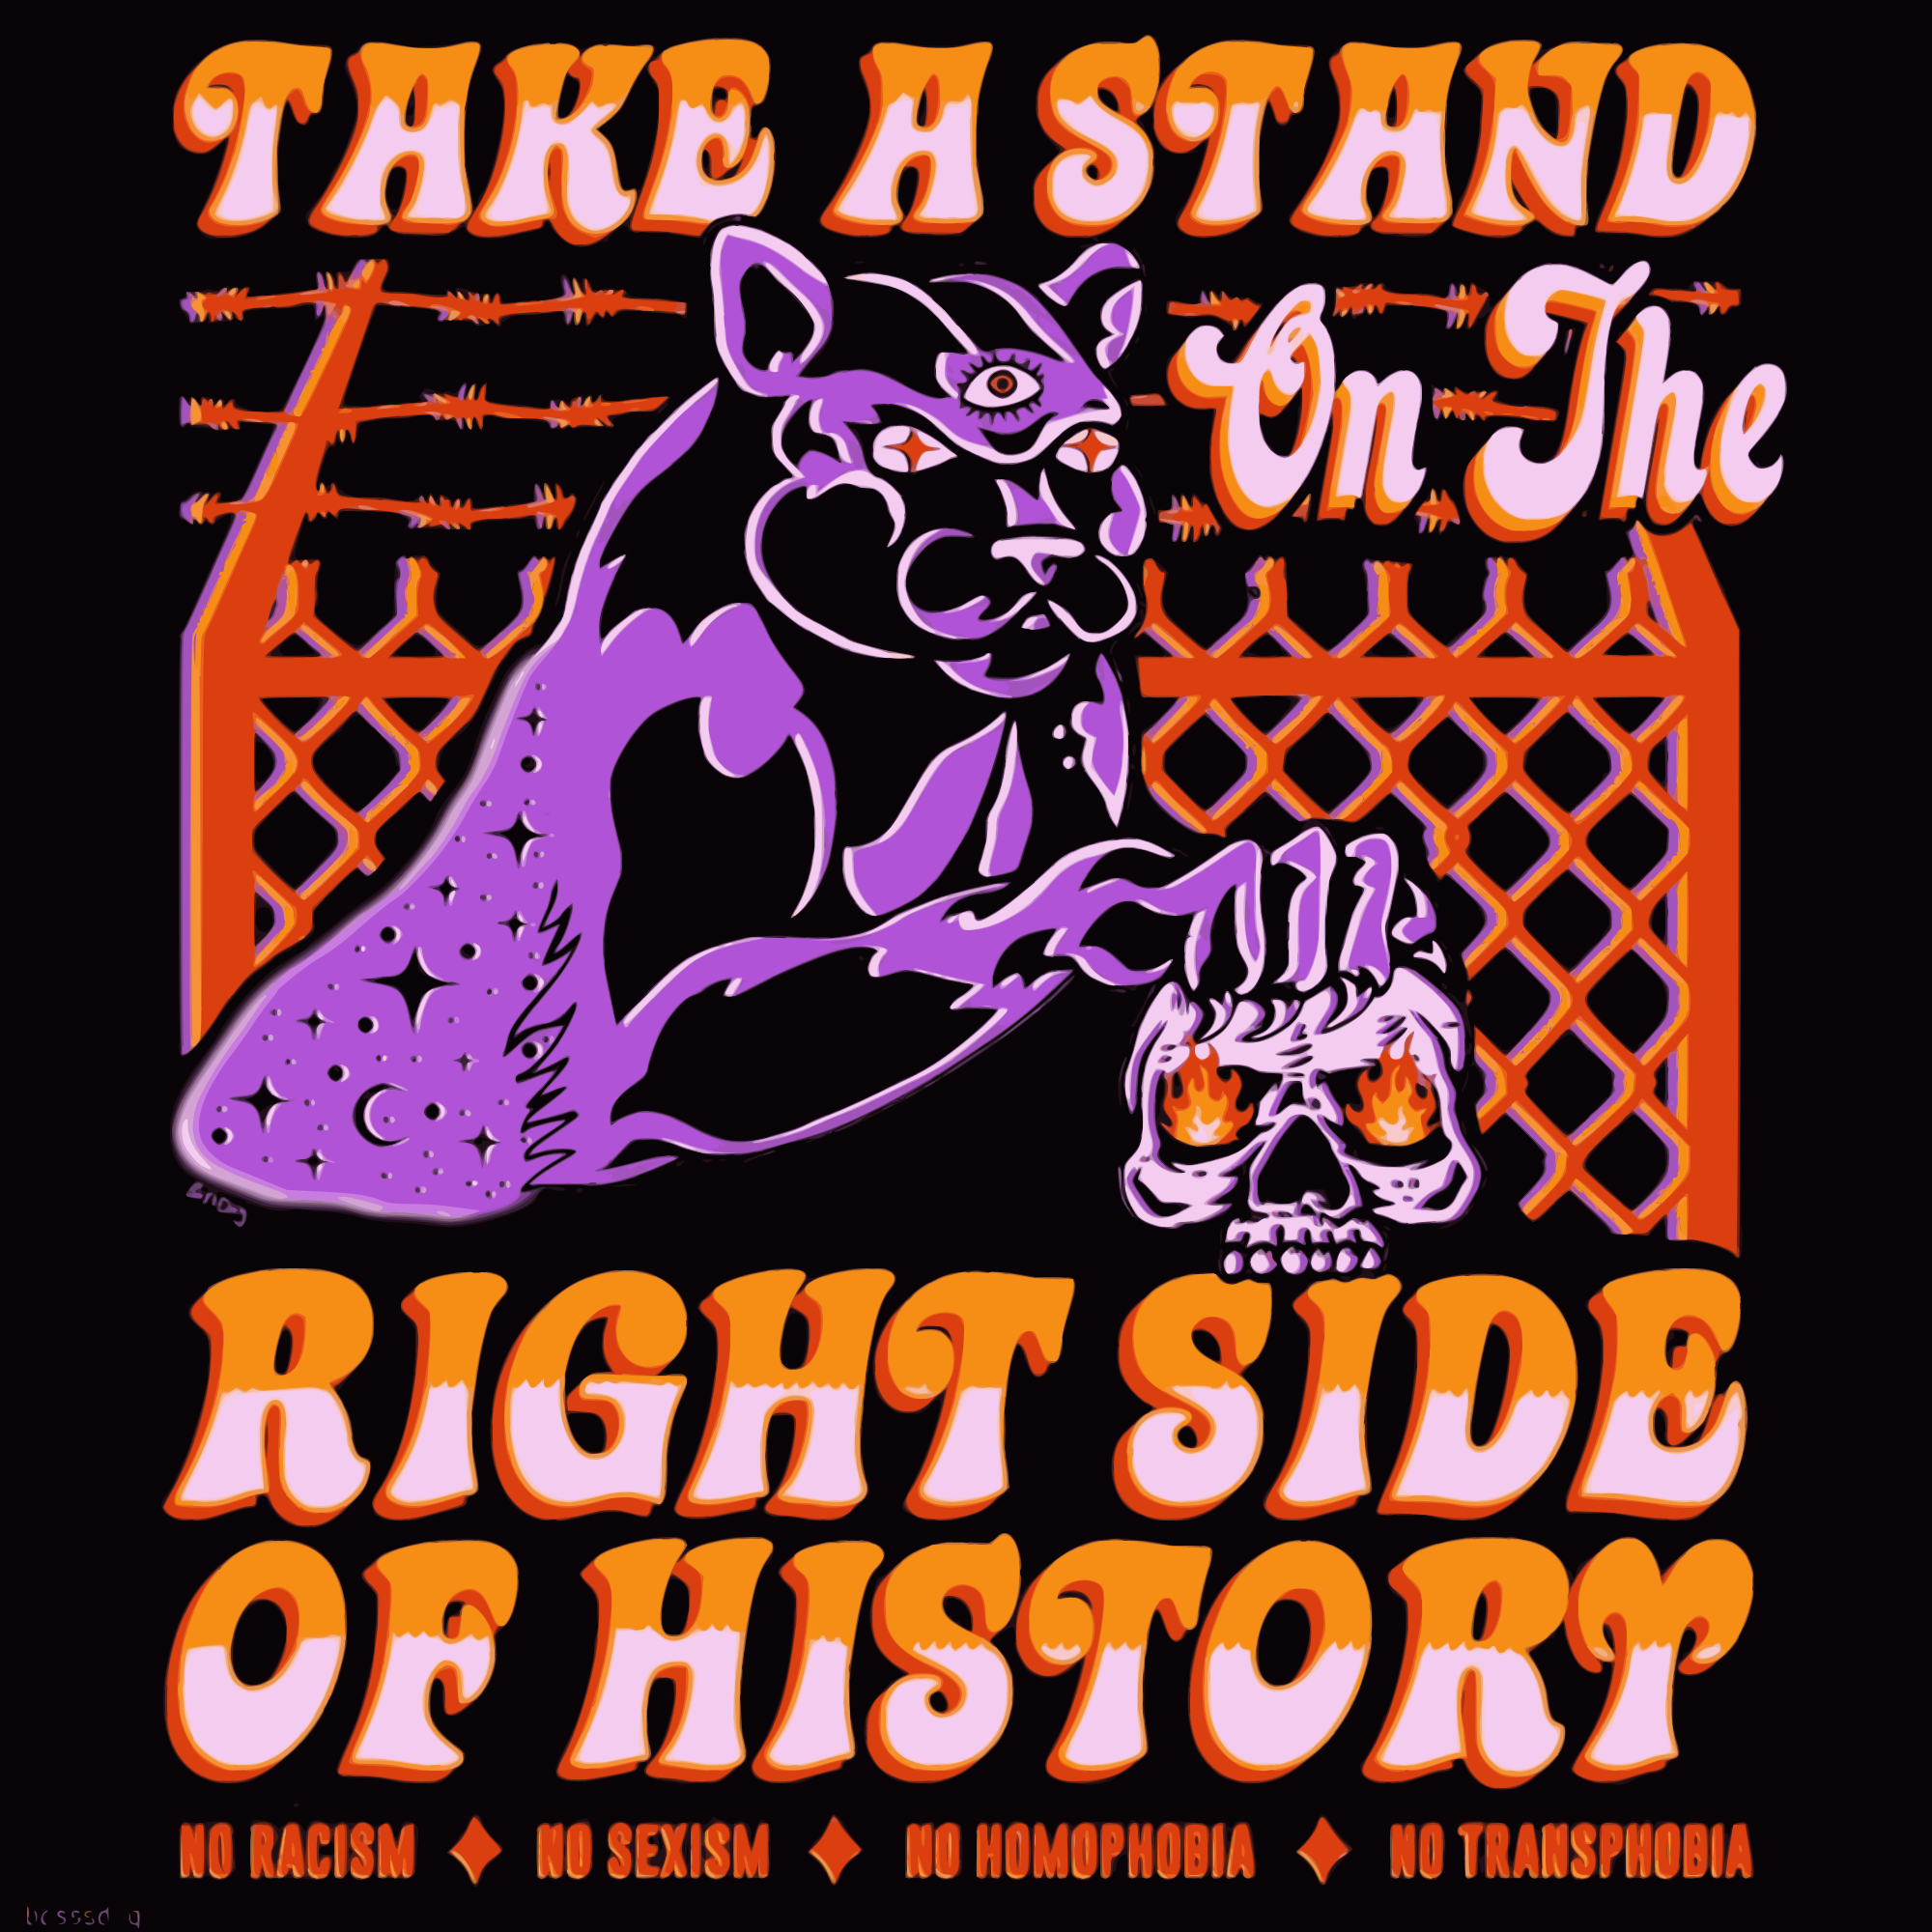 Take a stand on the right side of history